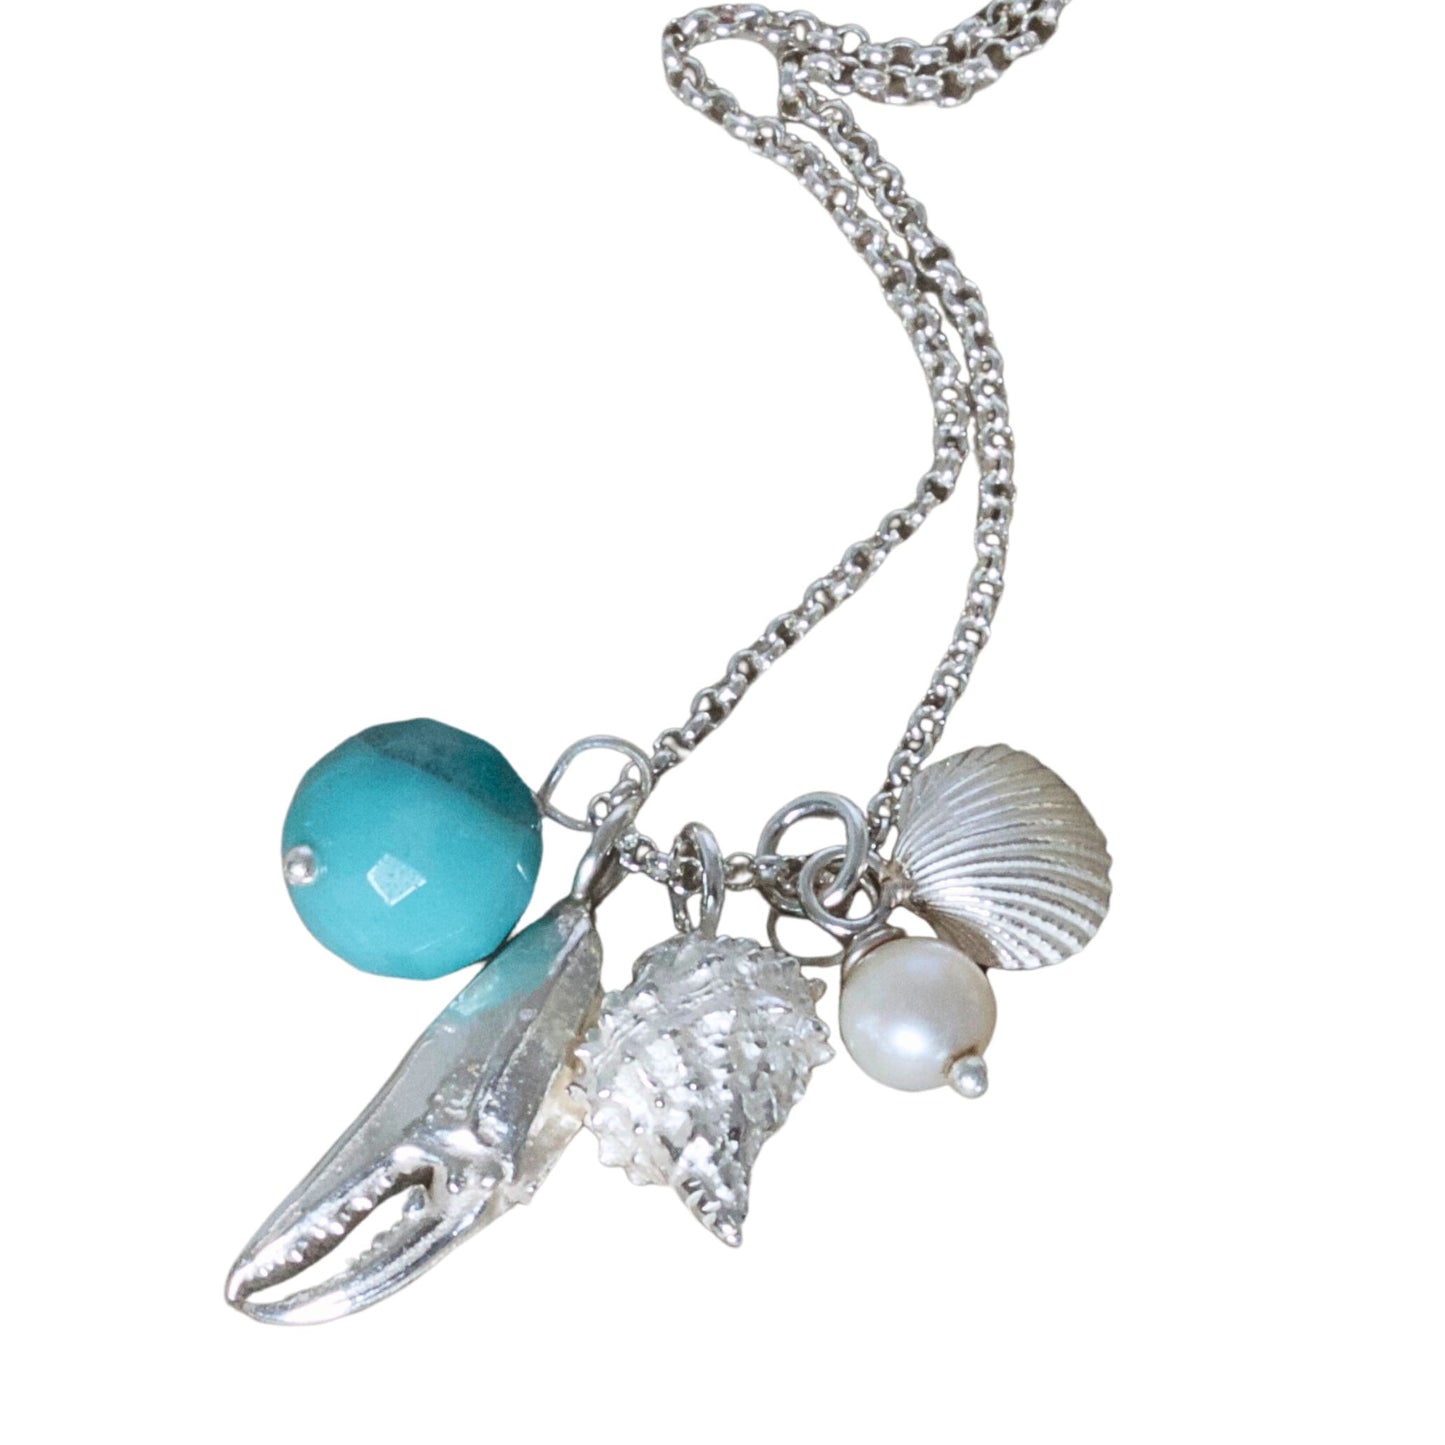 Beachcomber Silver Shell Cluster Necklace